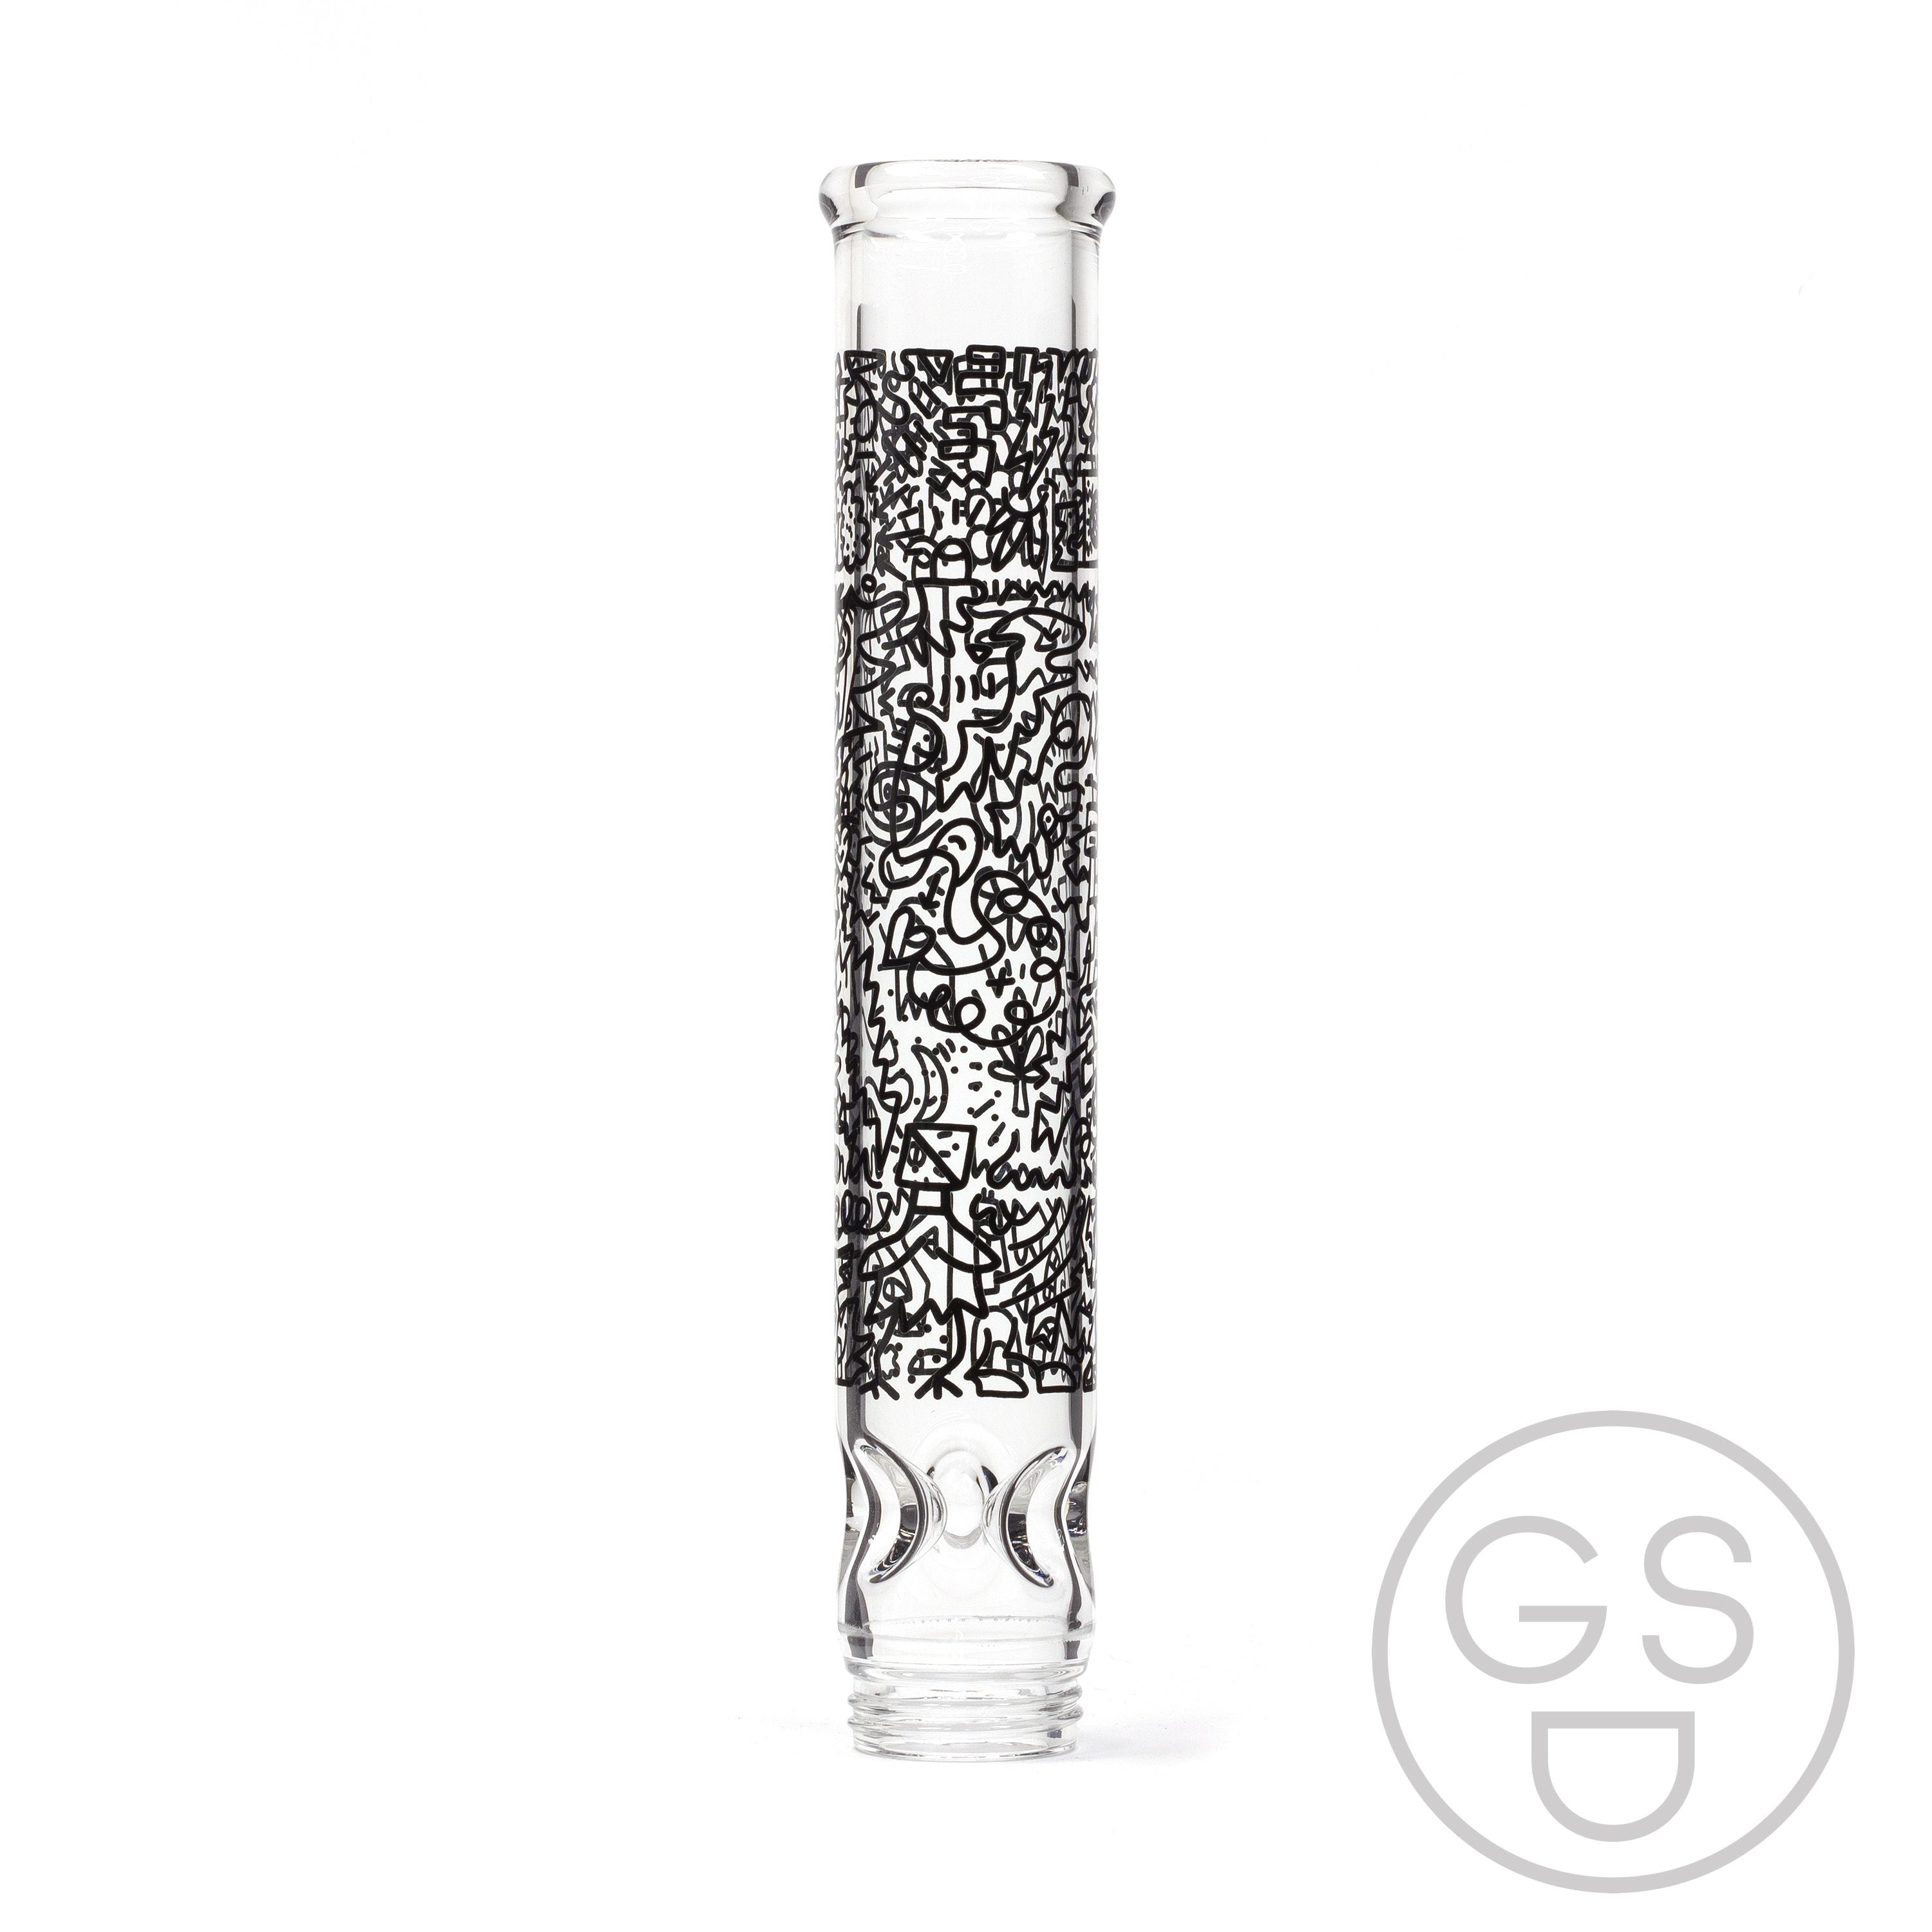 Prism Modular Waterpipe Tall Mouthpiece - Pretty Done / Clear